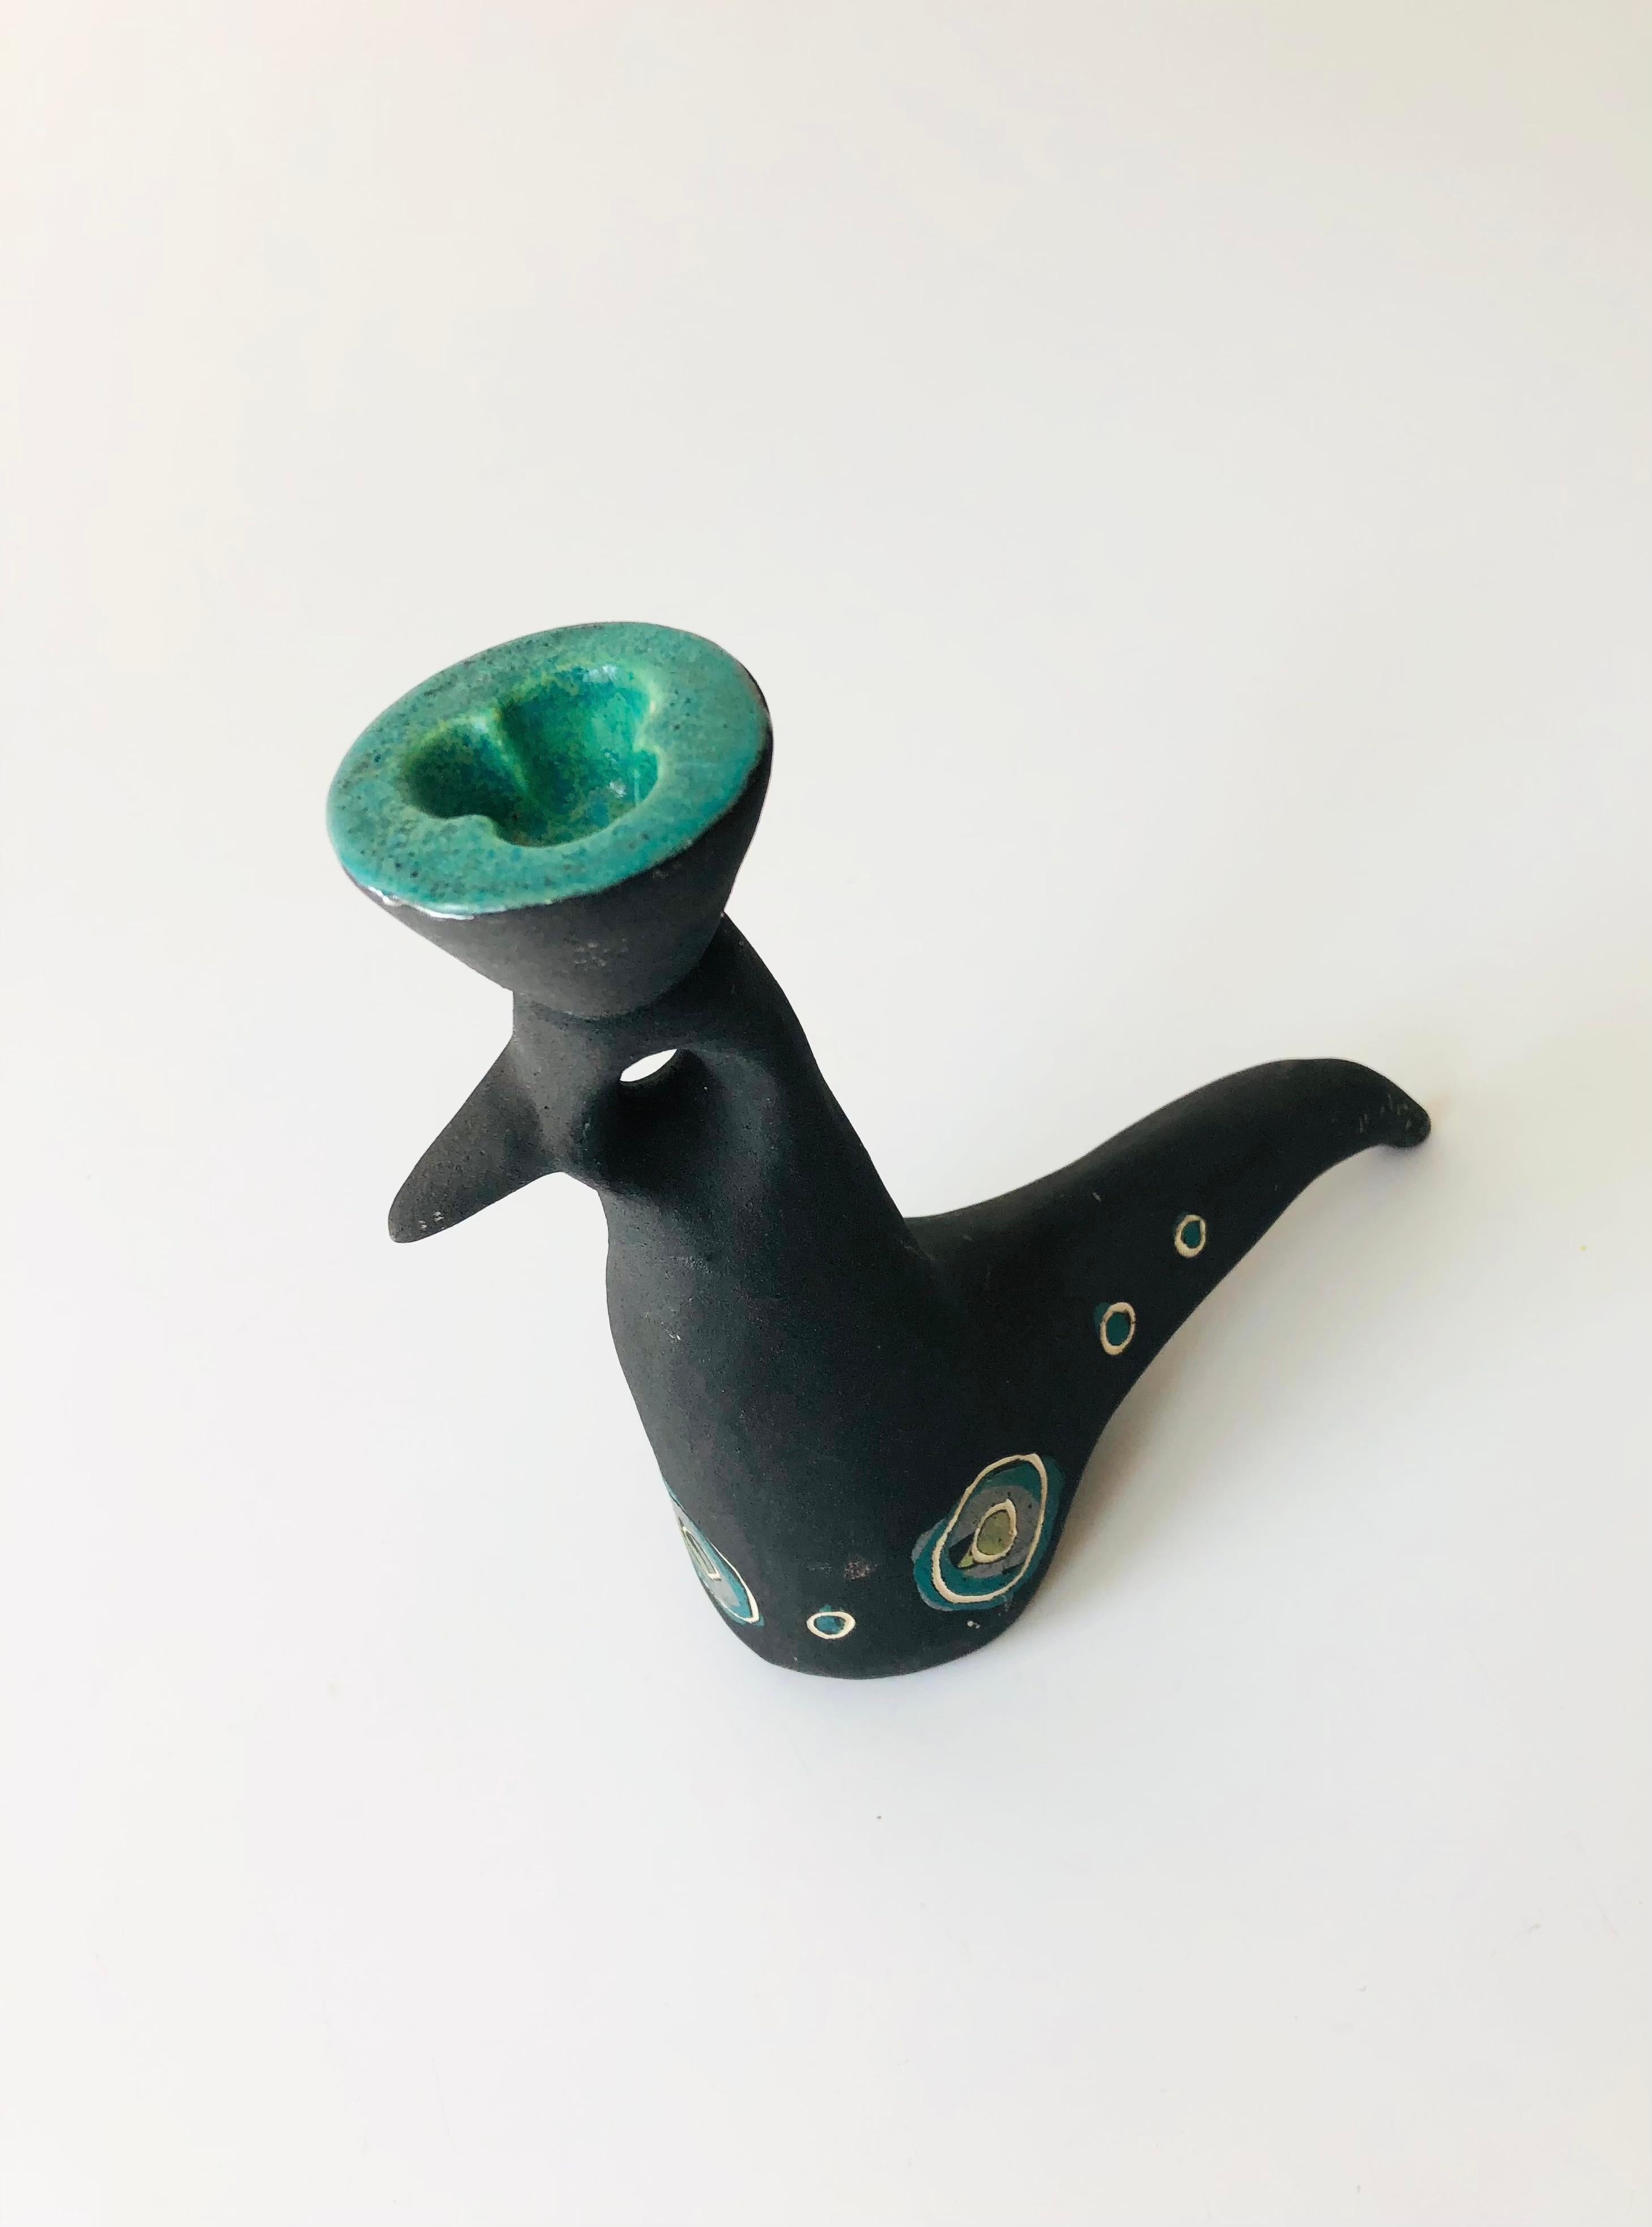 A midcentury Studio Pottery candle holder in the shape of a bird from the 1940s-1950s by husband and wife ceramicists, Charles and Alice Smith of California. Wonderfully quirky shape to the bird. Finished in matte black glaze and decorated with